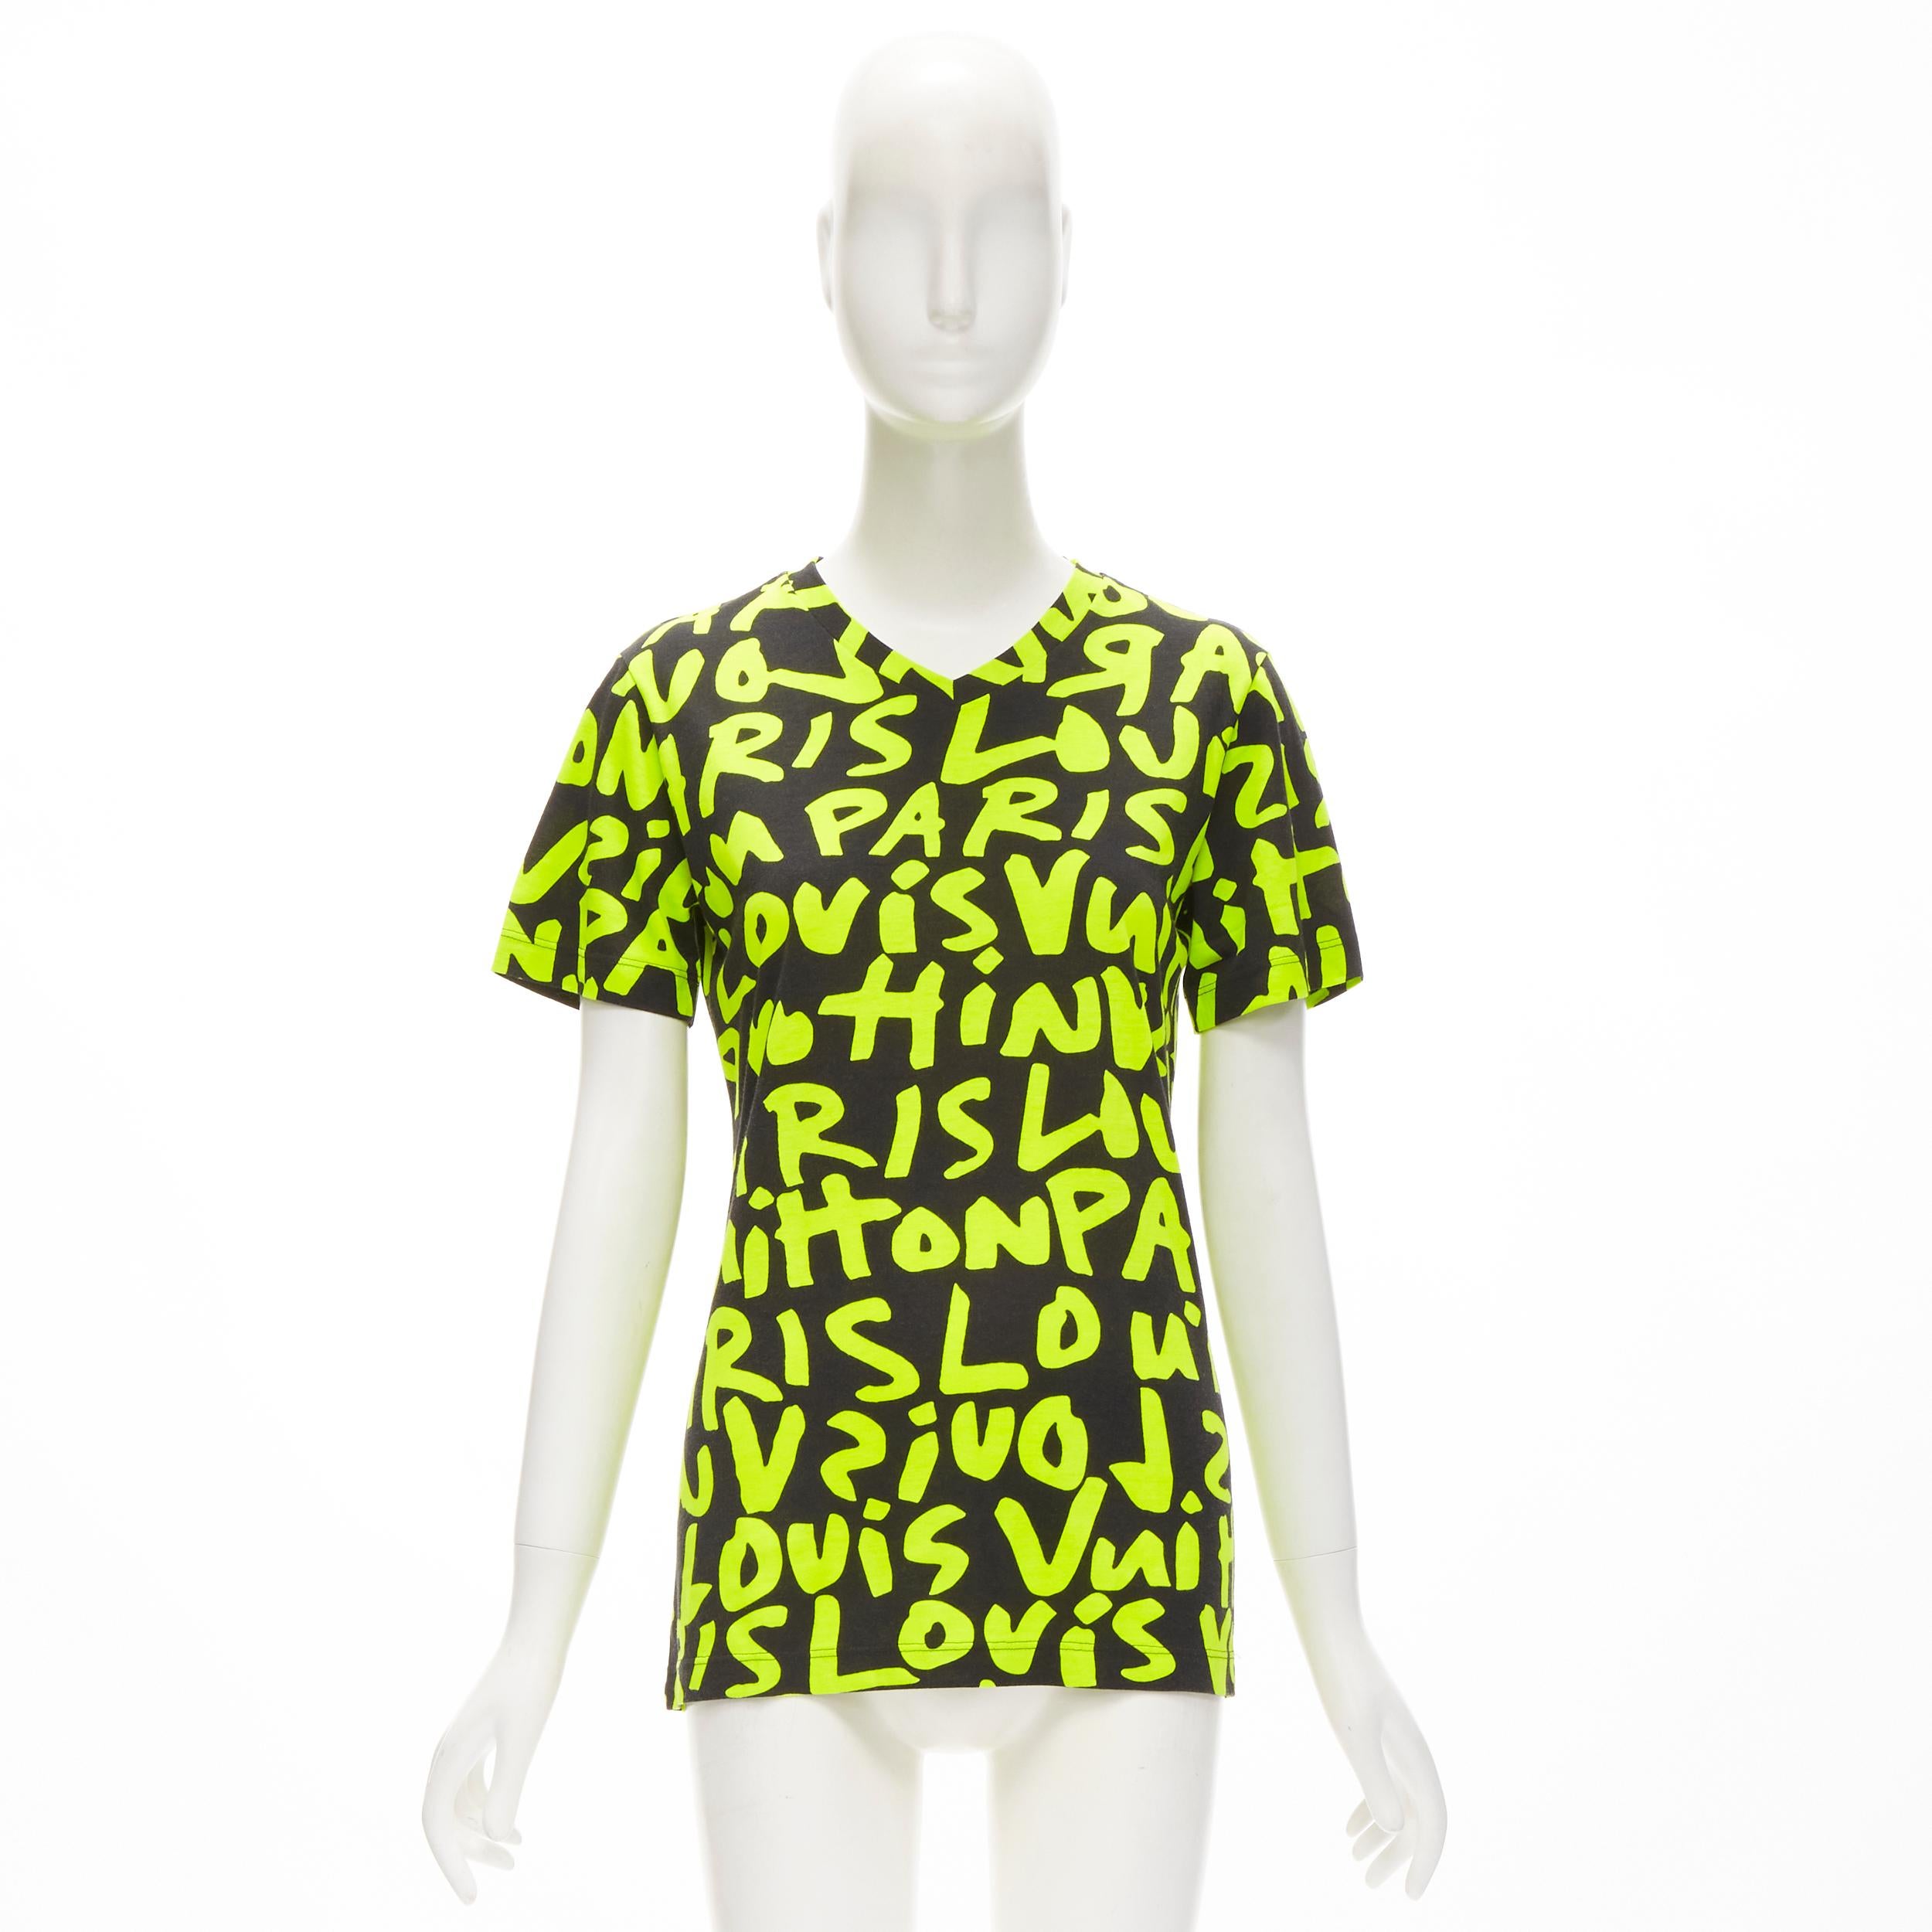 LOUIS VUITTON Stephen Sprouse Iconic Graffiti black neon yellow tshirt For Sale 1